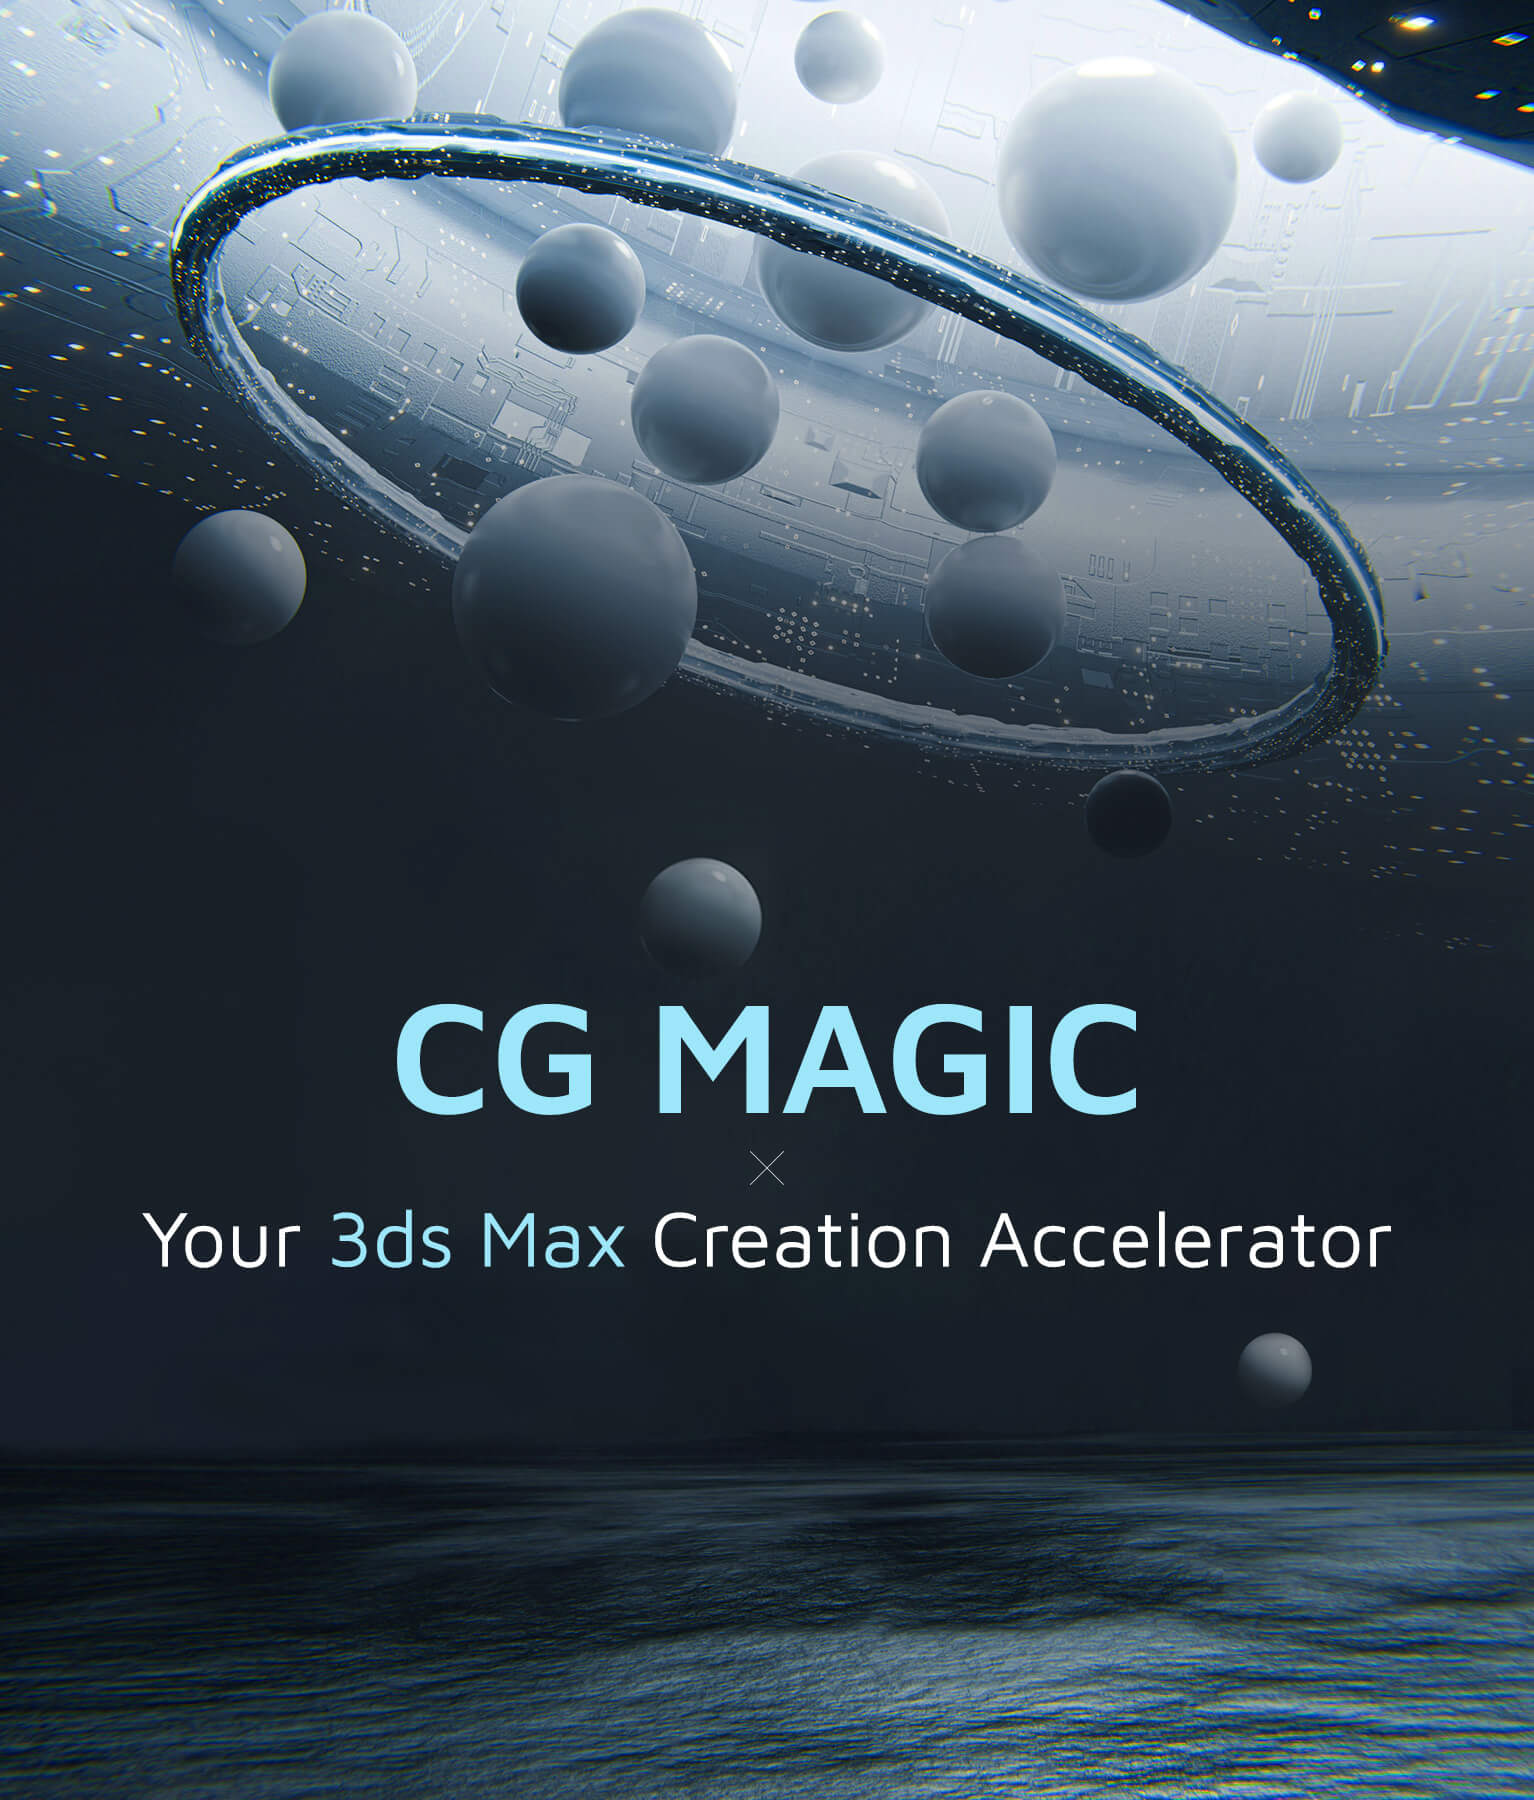 CG Magic your 3ds max creation accelerator